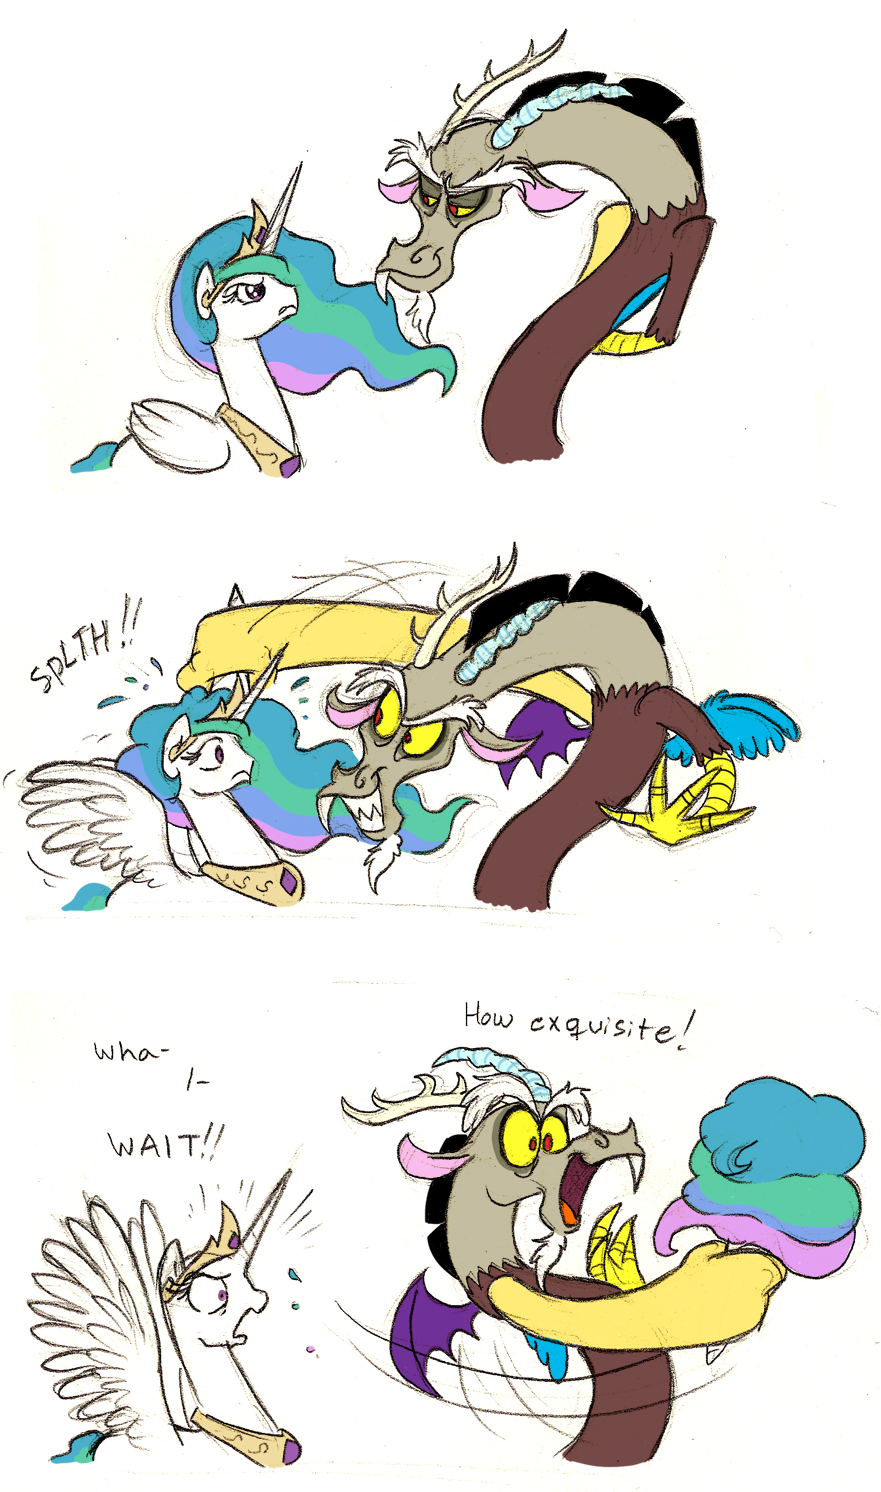 discord_being_discord_by_mickeymonster-d4neld1.png